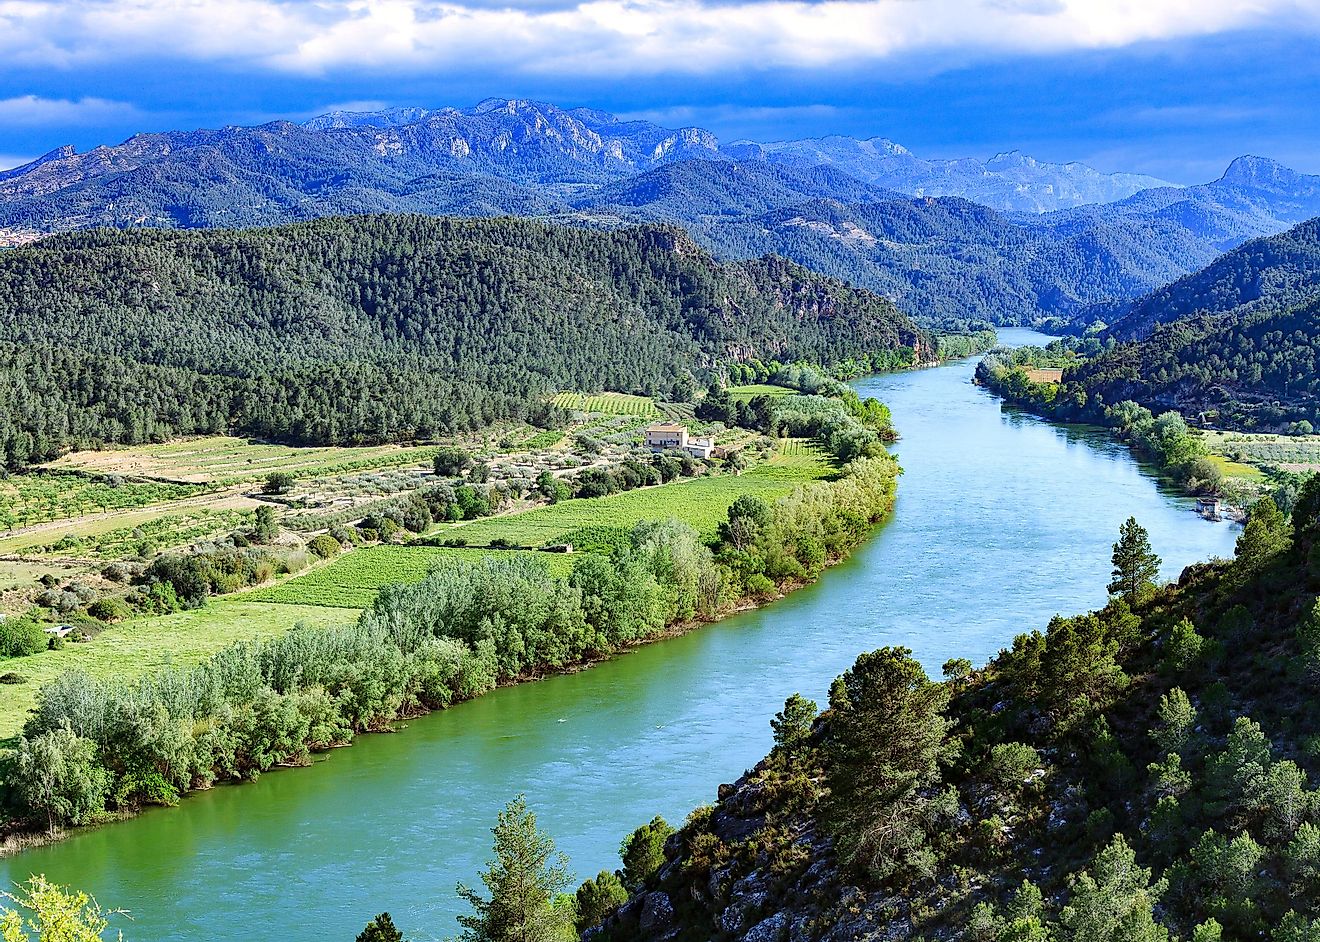 The beautiful Ebro River flowing through the mountains in Spain.